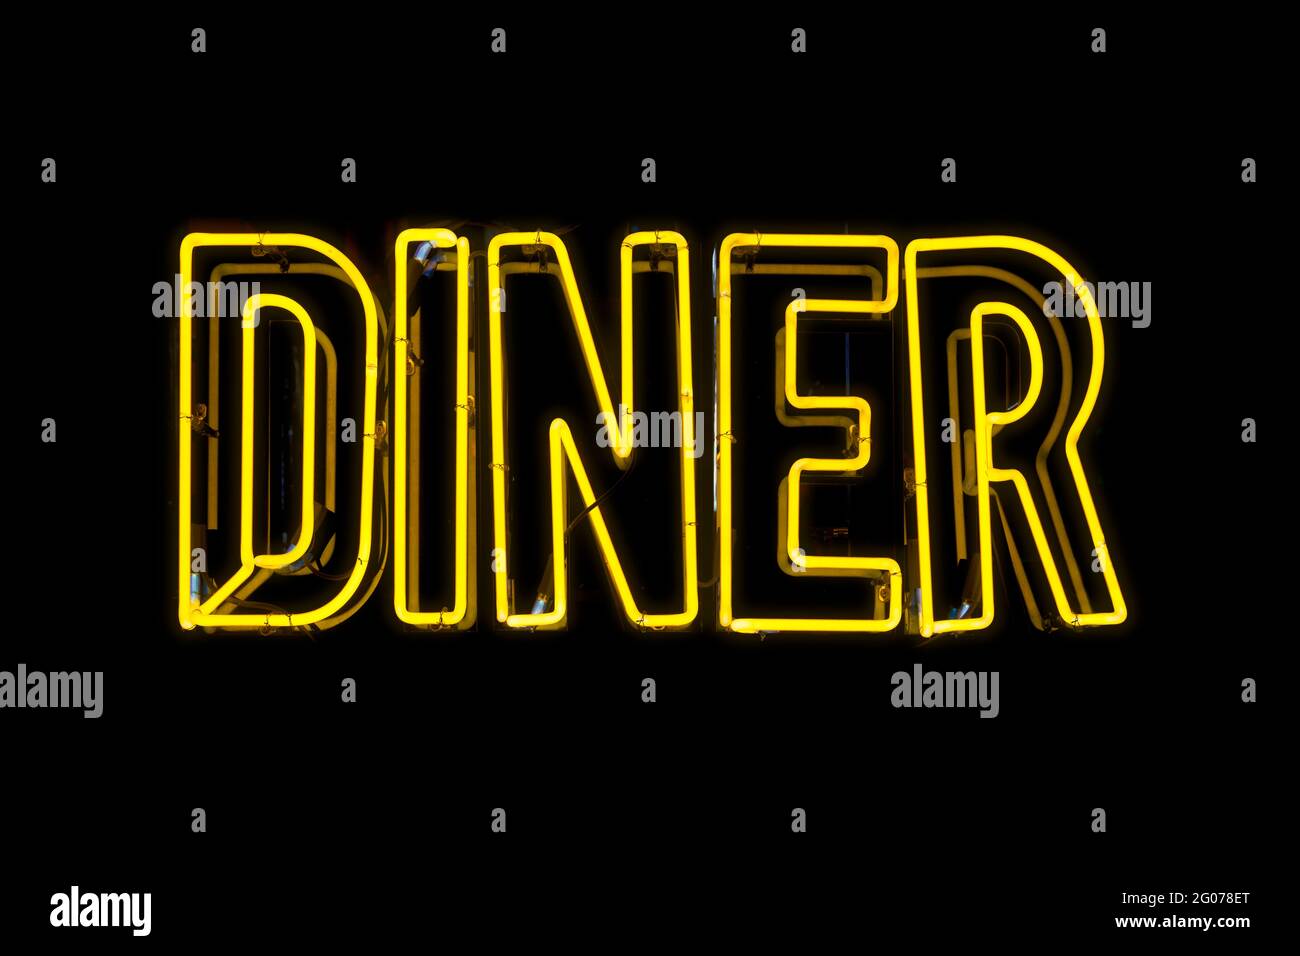 Close-up on a neon light shaped into the word "Diner". Stock Photo